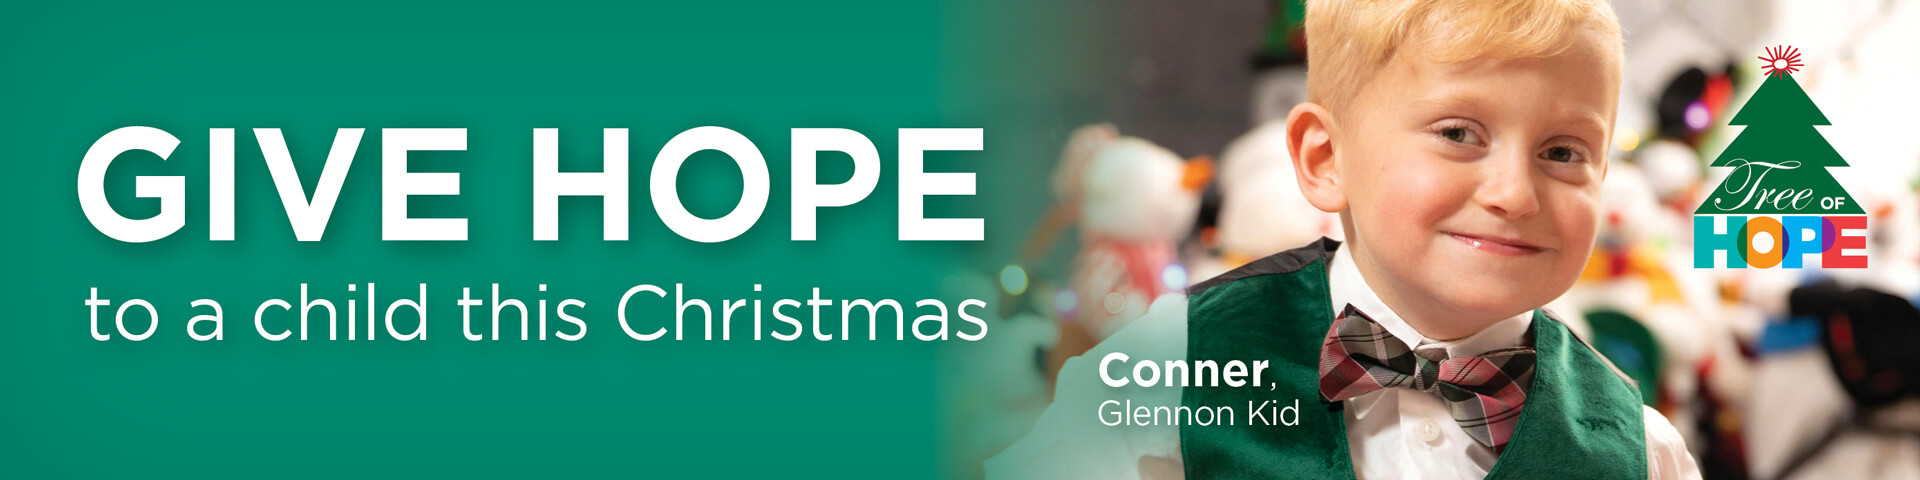 Tree of Hope web header - "Give Hope to a child this Christmas." Picture of Conner - Glennon kid